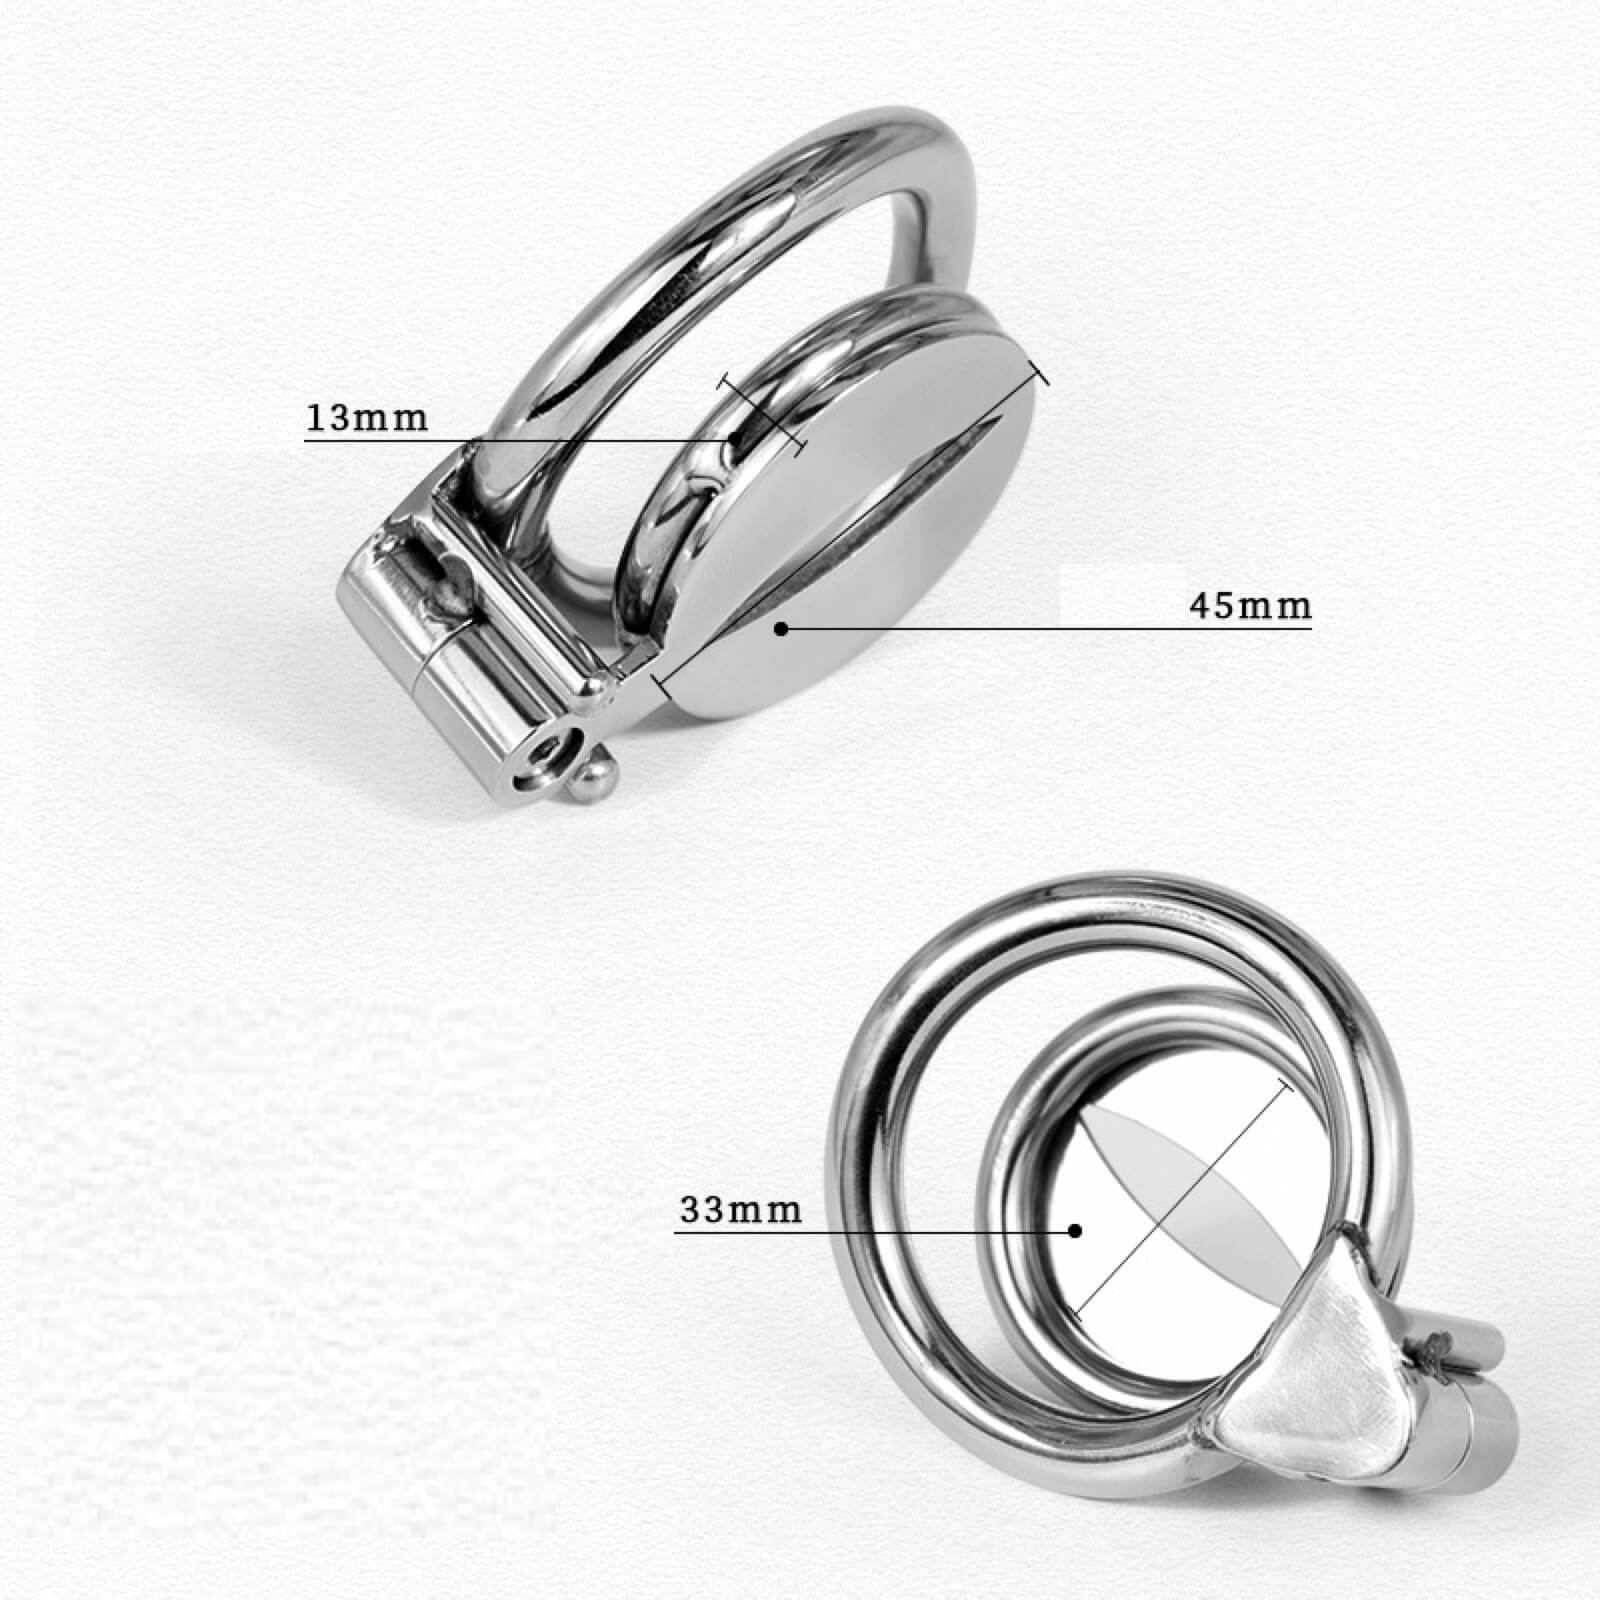 Circular arc clasp flat chastity lock – chastity-devices